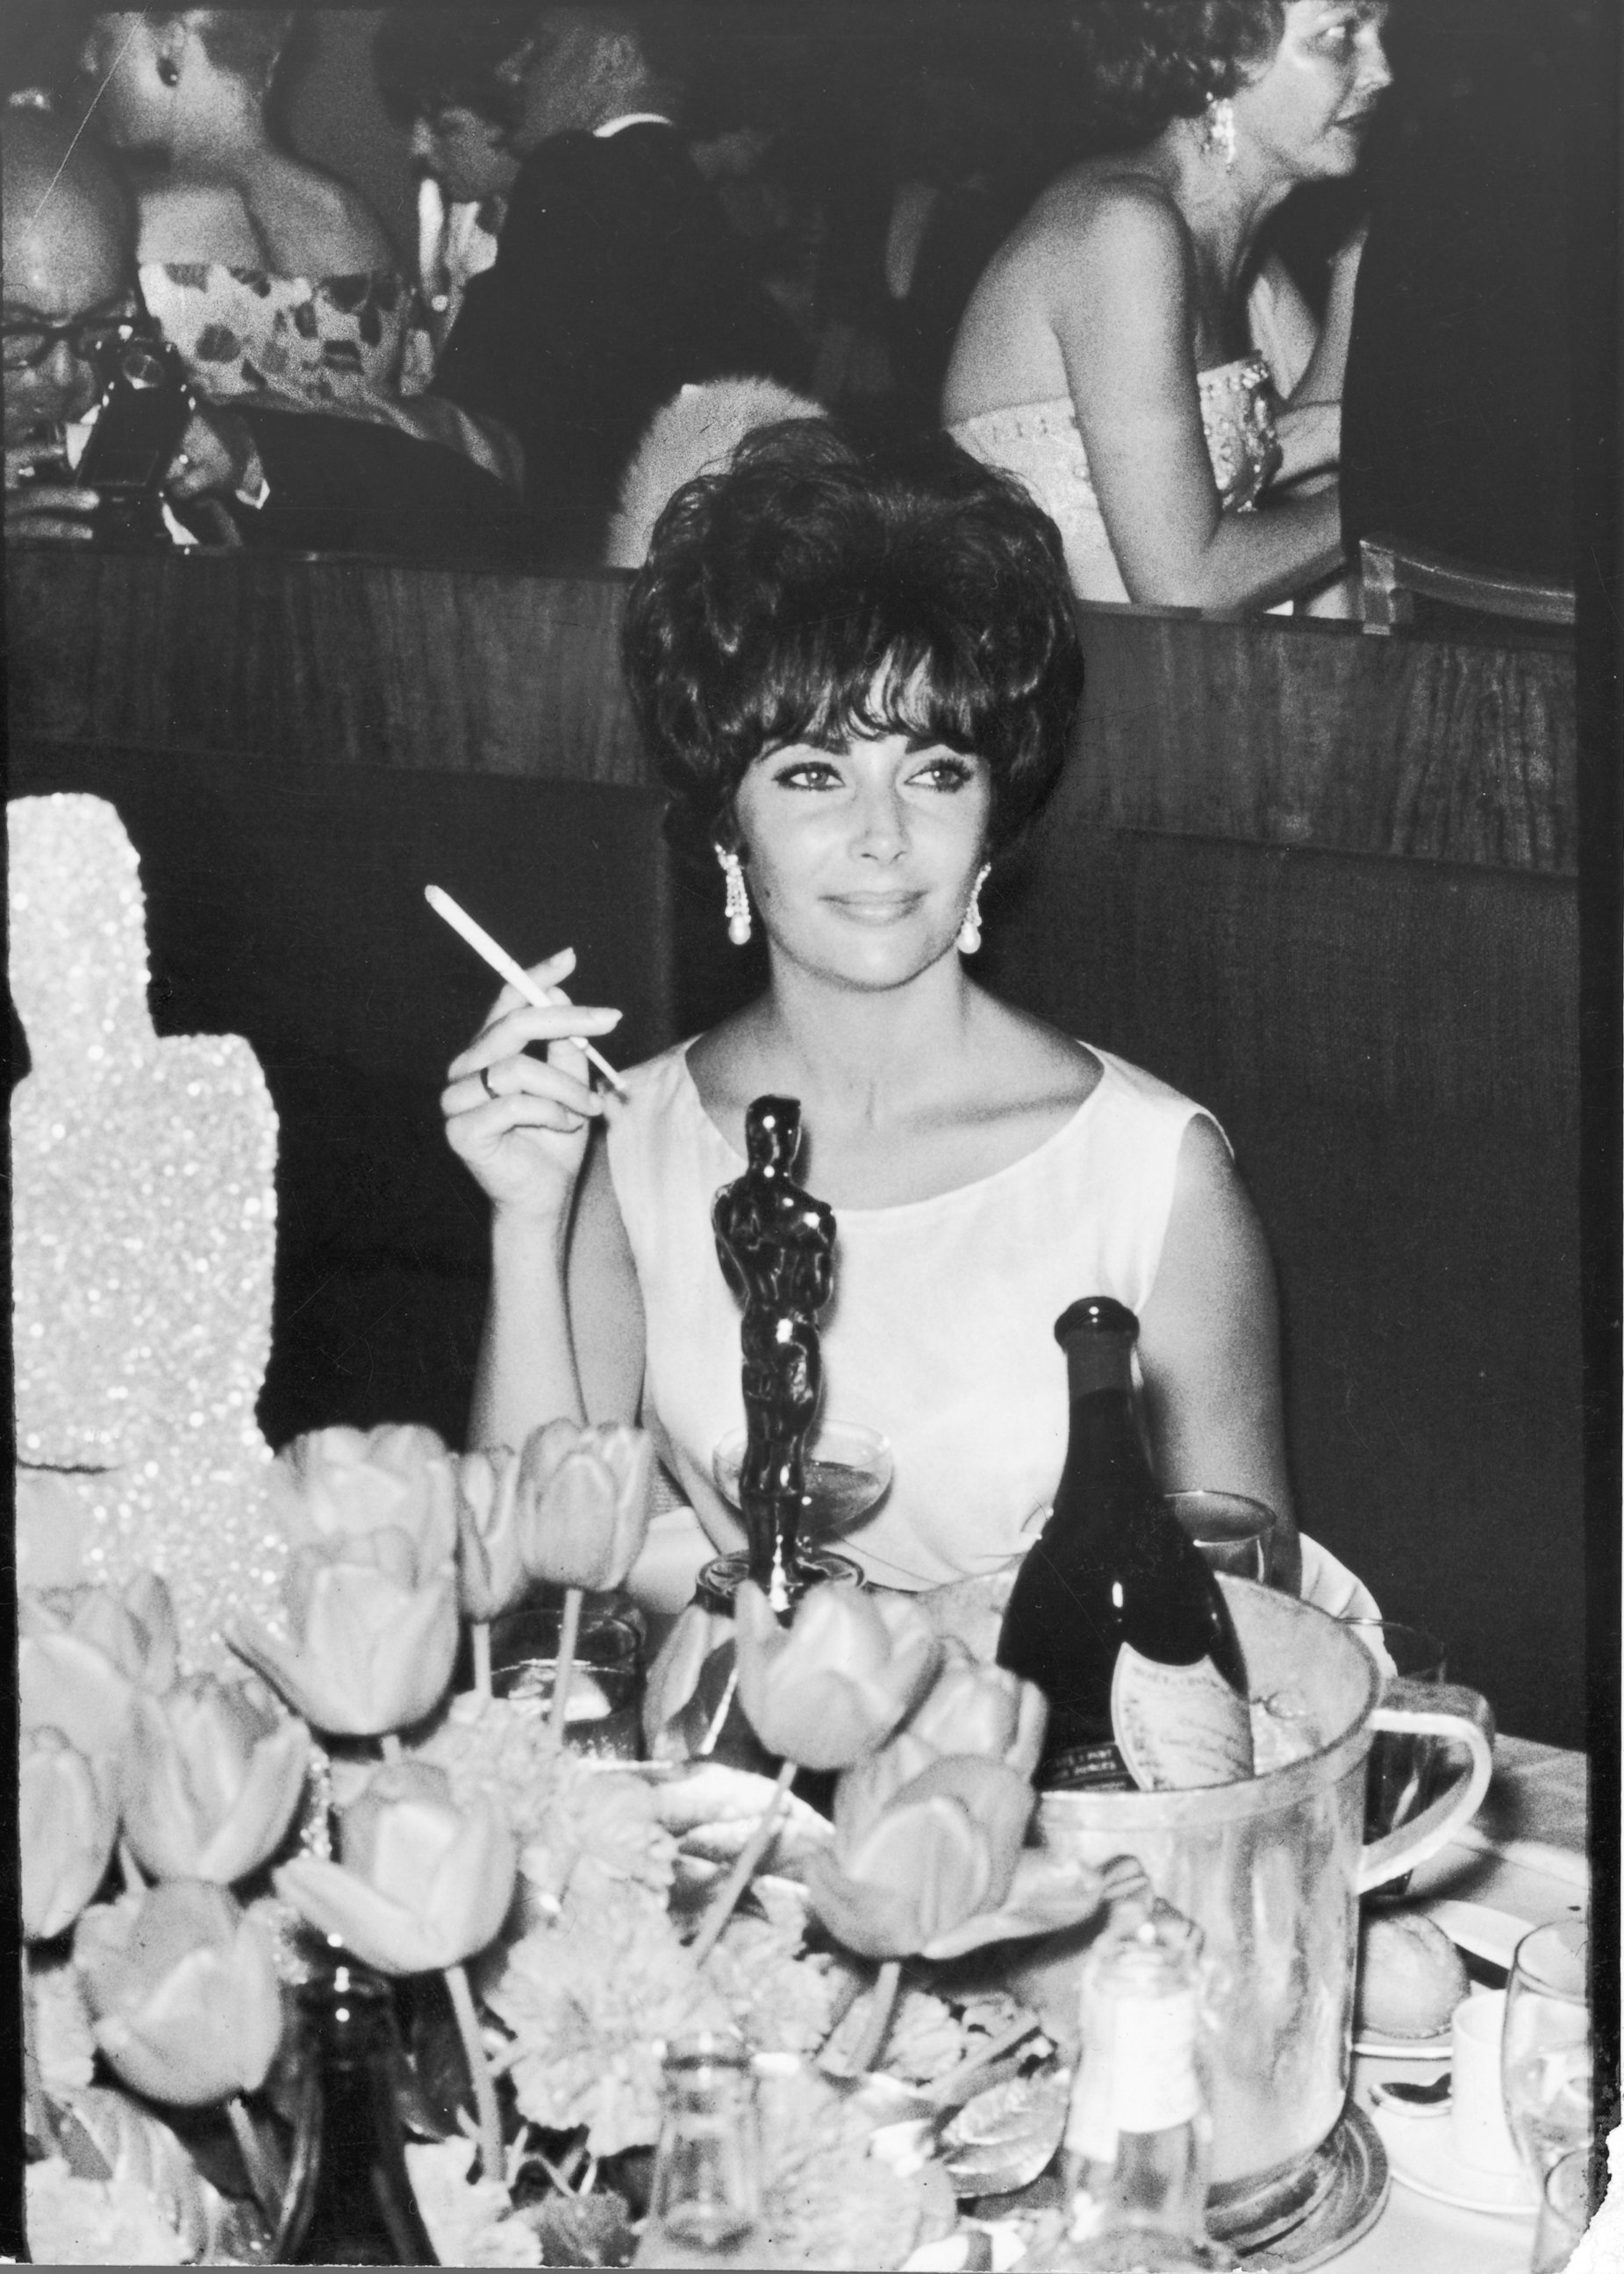 PHOTO: Elizabeth Taylor is pictured at a party in Hollywood, California, after winning an Oscar award, which is on table in front of her, circa 1961.   